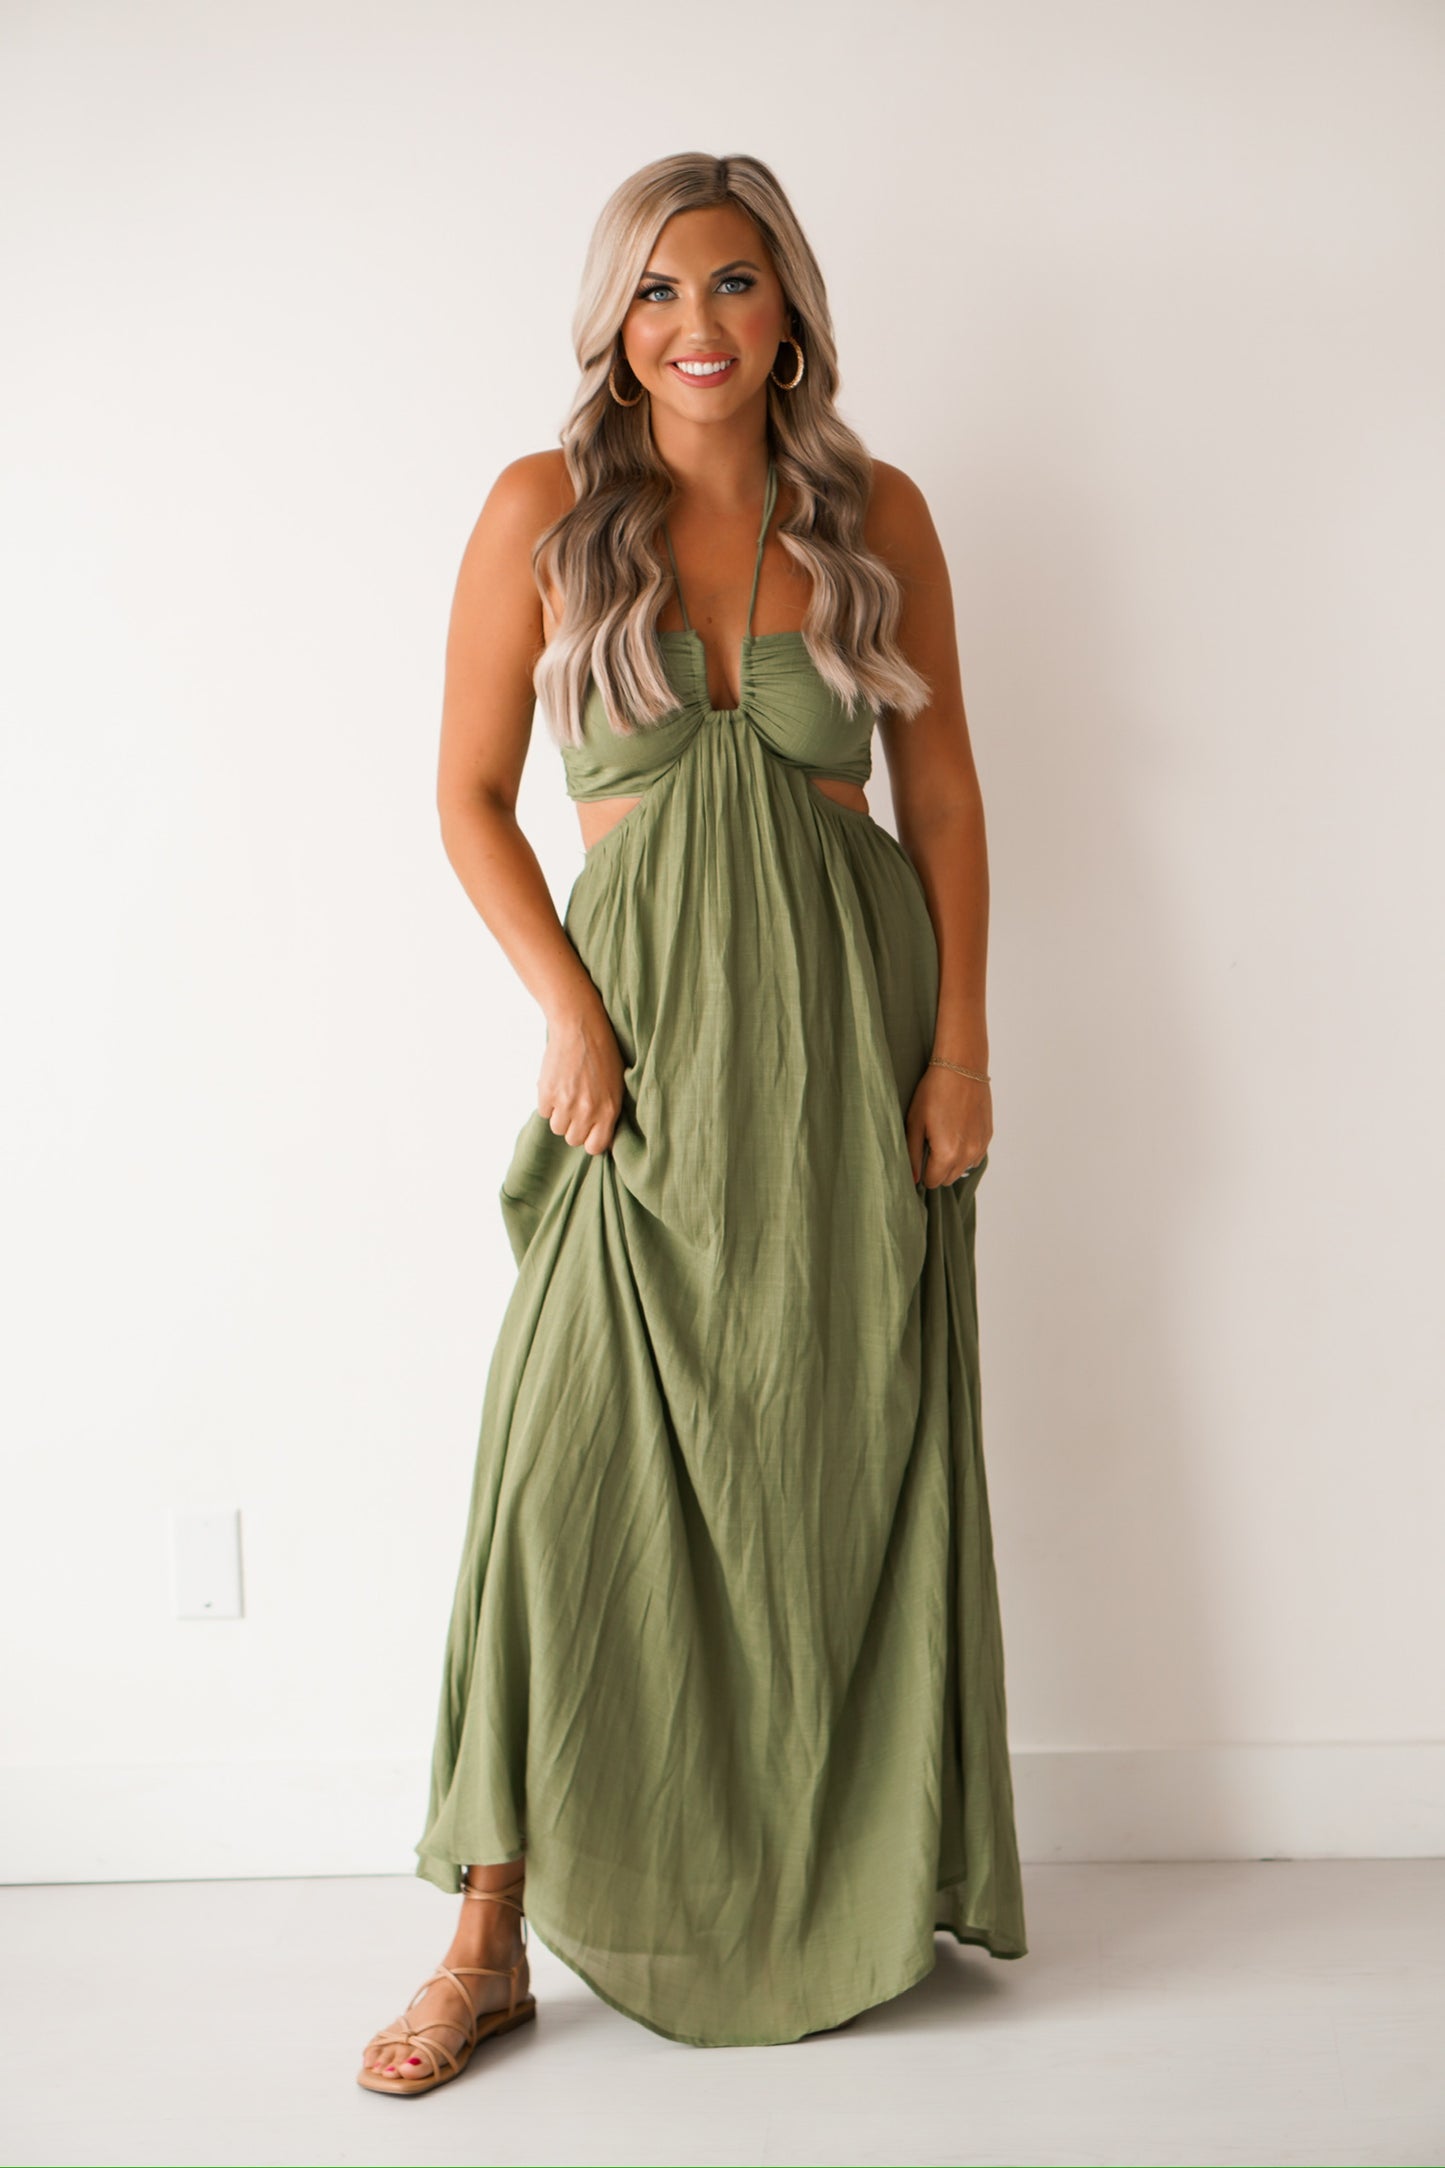 girl standing against a white wall wearing a long green dress that has cutouts on the side of the hips. SHe is wearing sandals